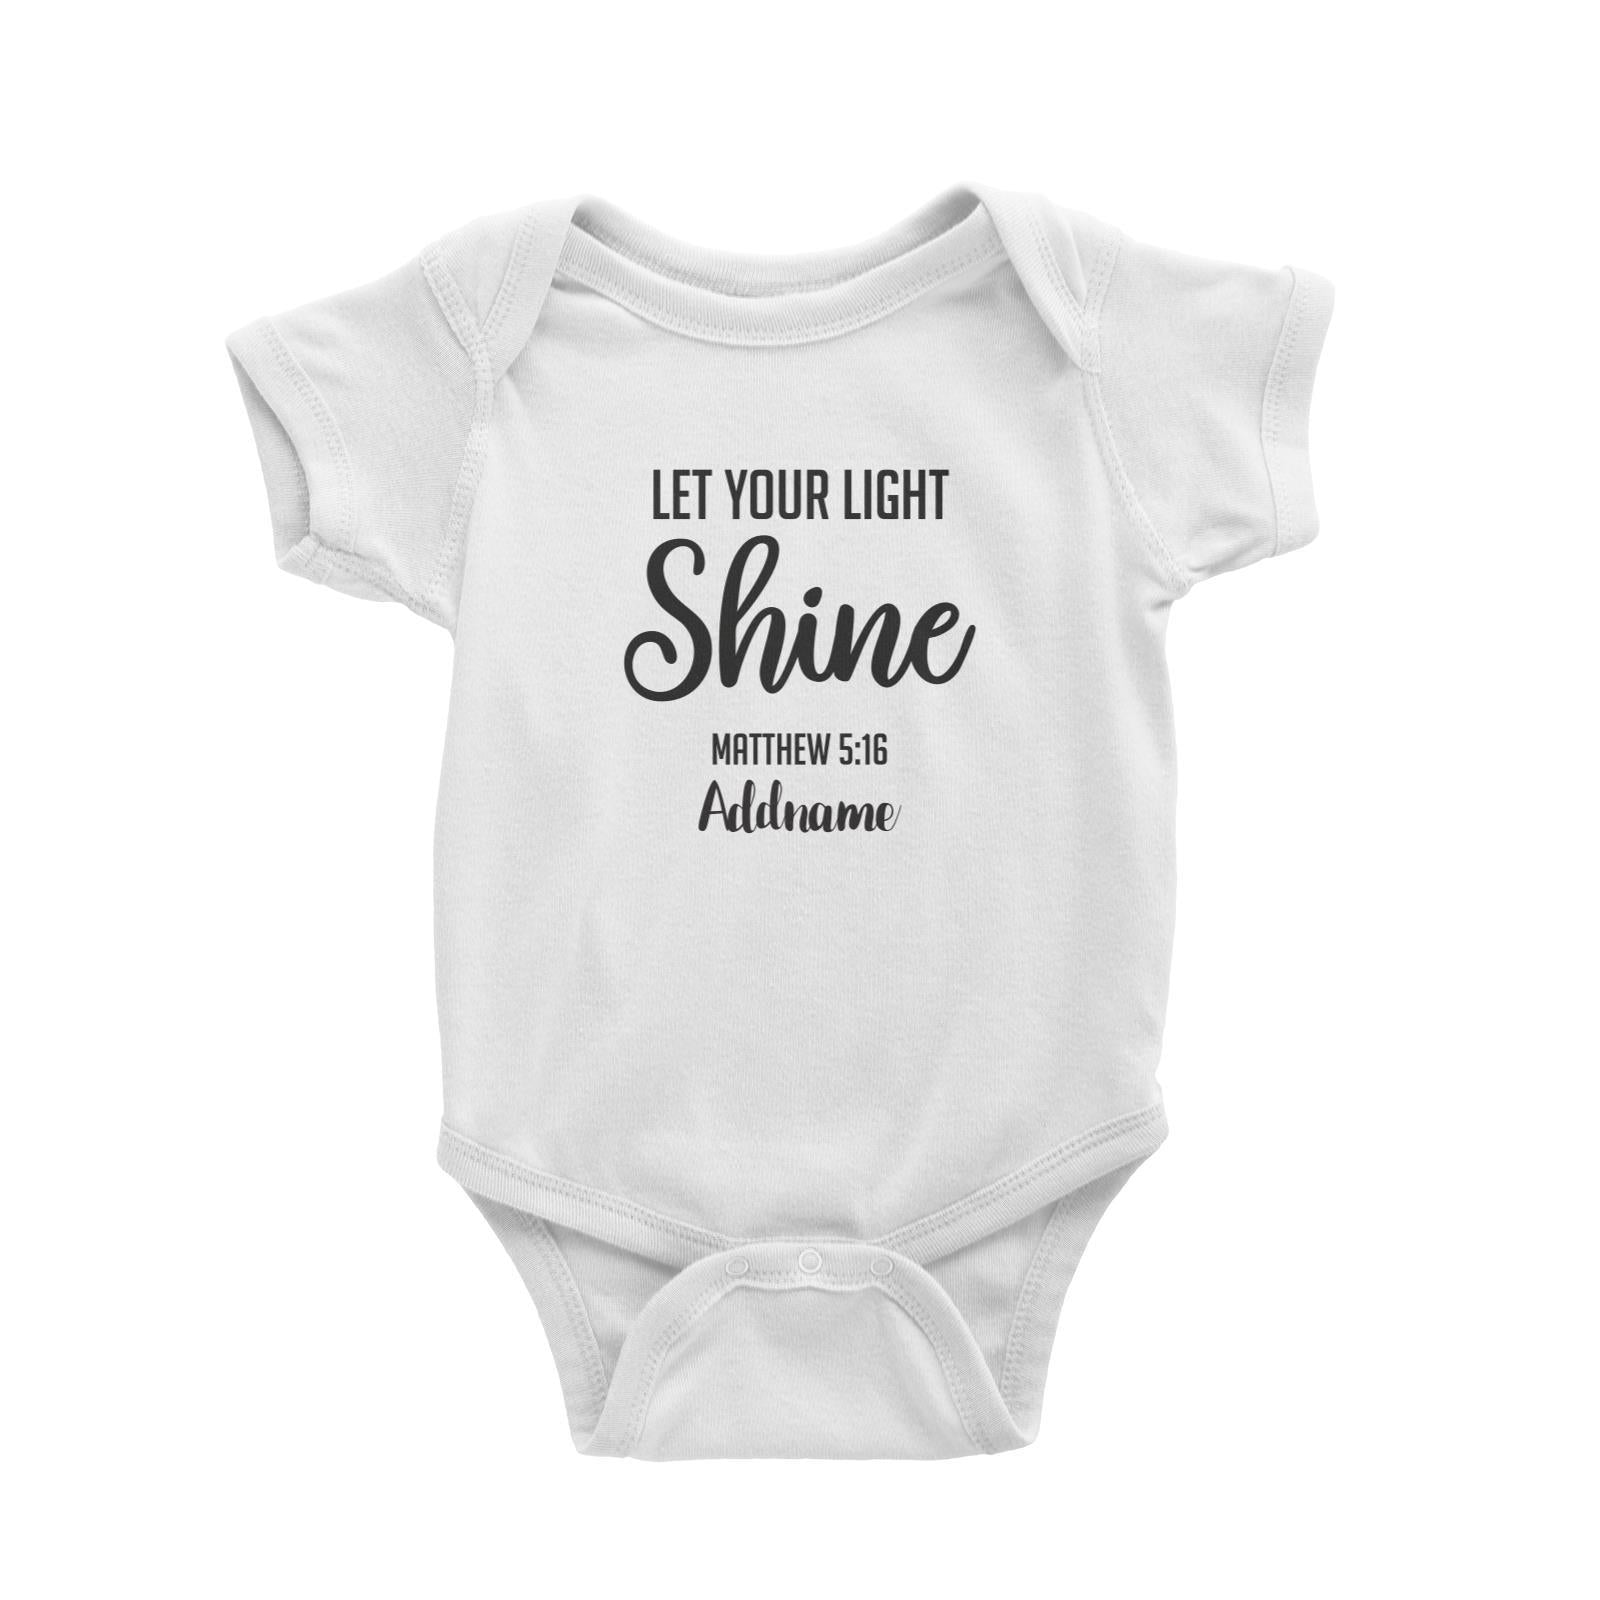 Christian Series Let Your Light Shine Matthew 5.16 Addname Baby Romper